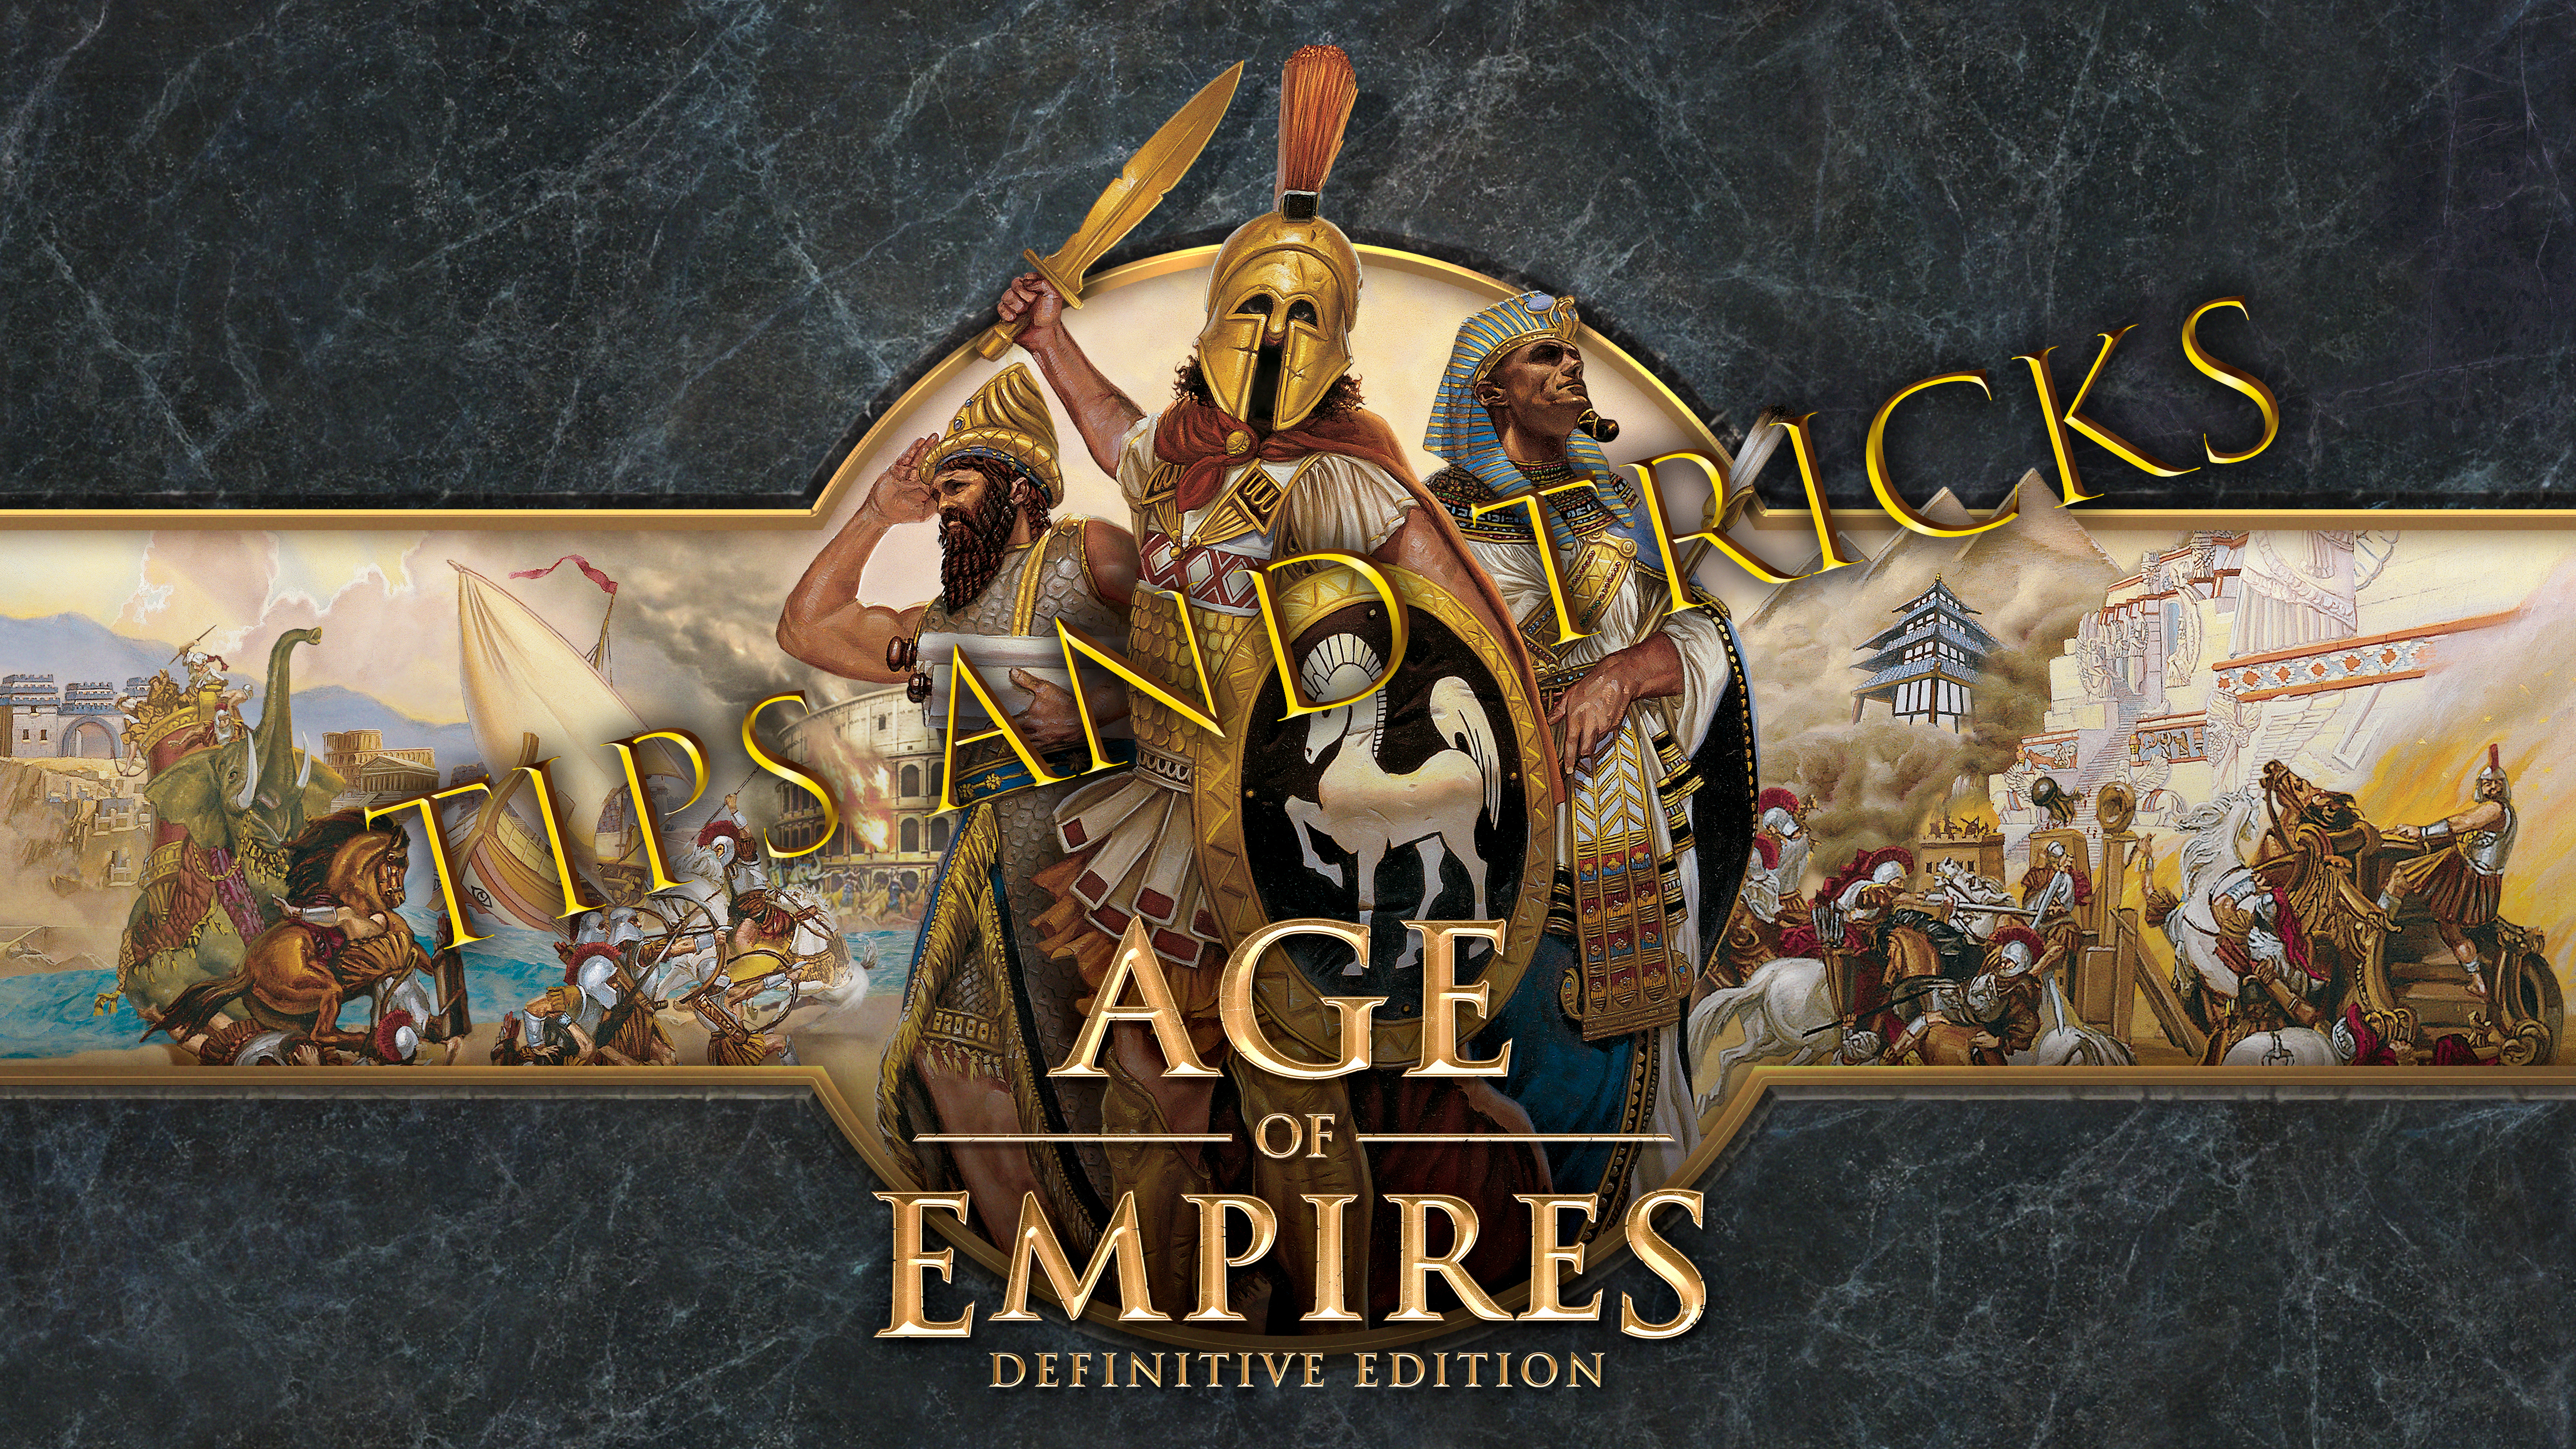 Age of empires 2 definitive edition guide edition